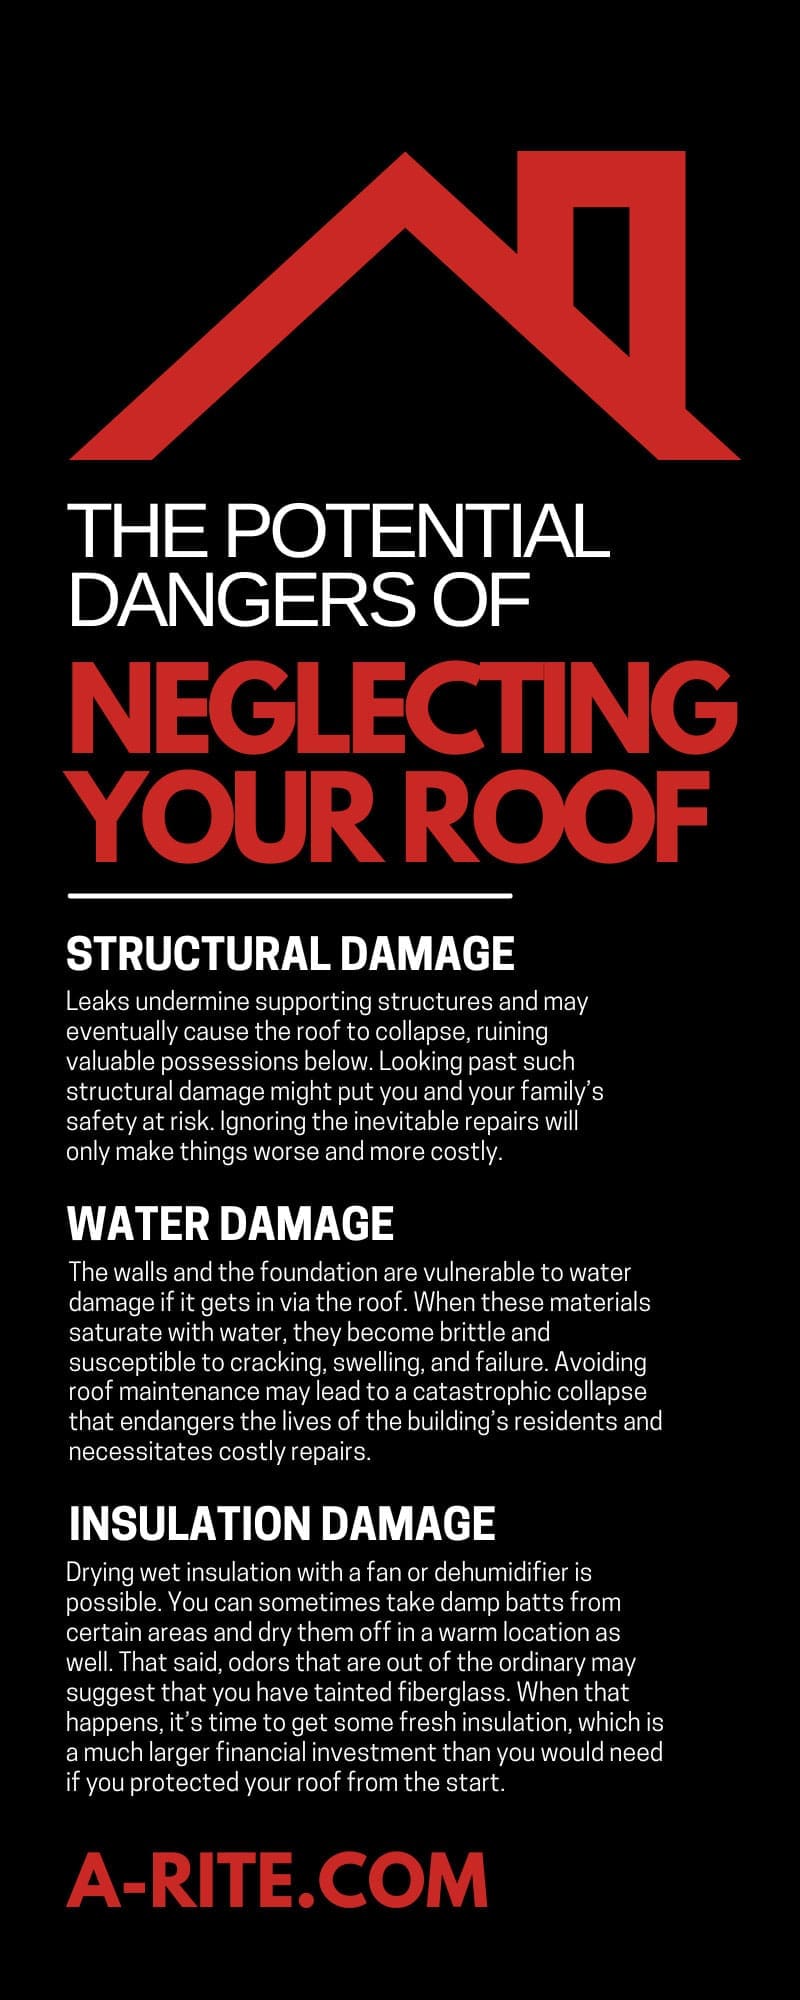 The Potential Dangers of Neglecting Your Roof